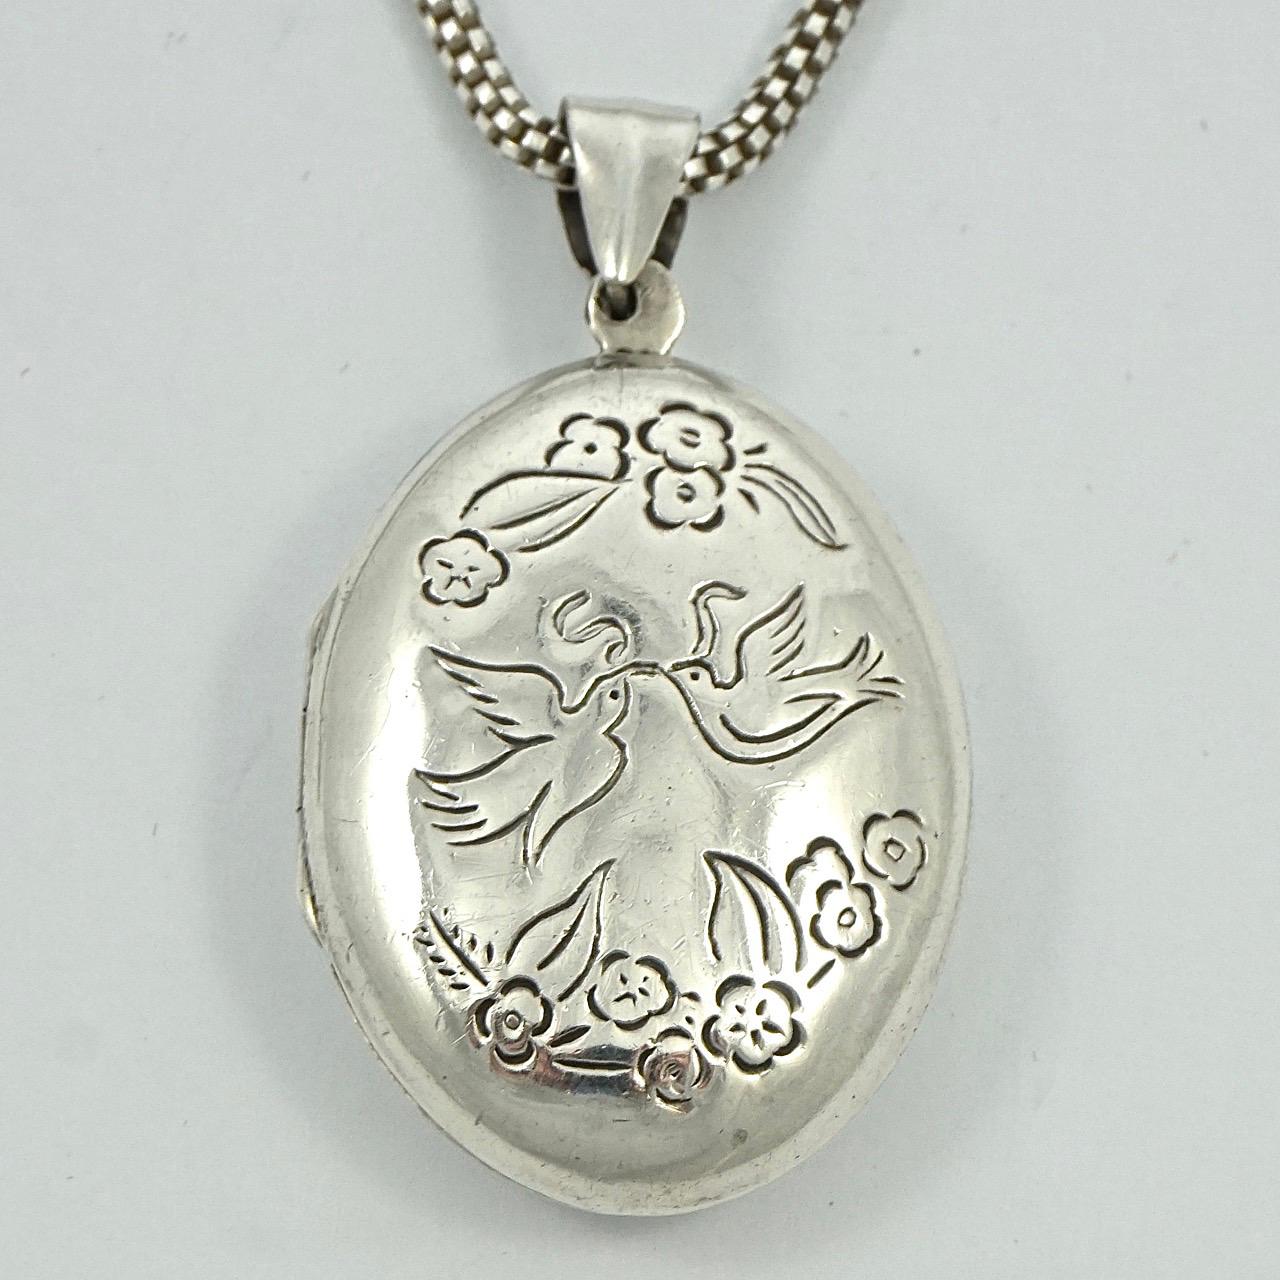 
Sterling silver large locket and mesh chain, featuring a beautiful doves and ribbon design with flower garlands to the front, and a verse to the back. The verse says 'How do I love thee ? Let me count the ways. I love thee to the depth and breadth